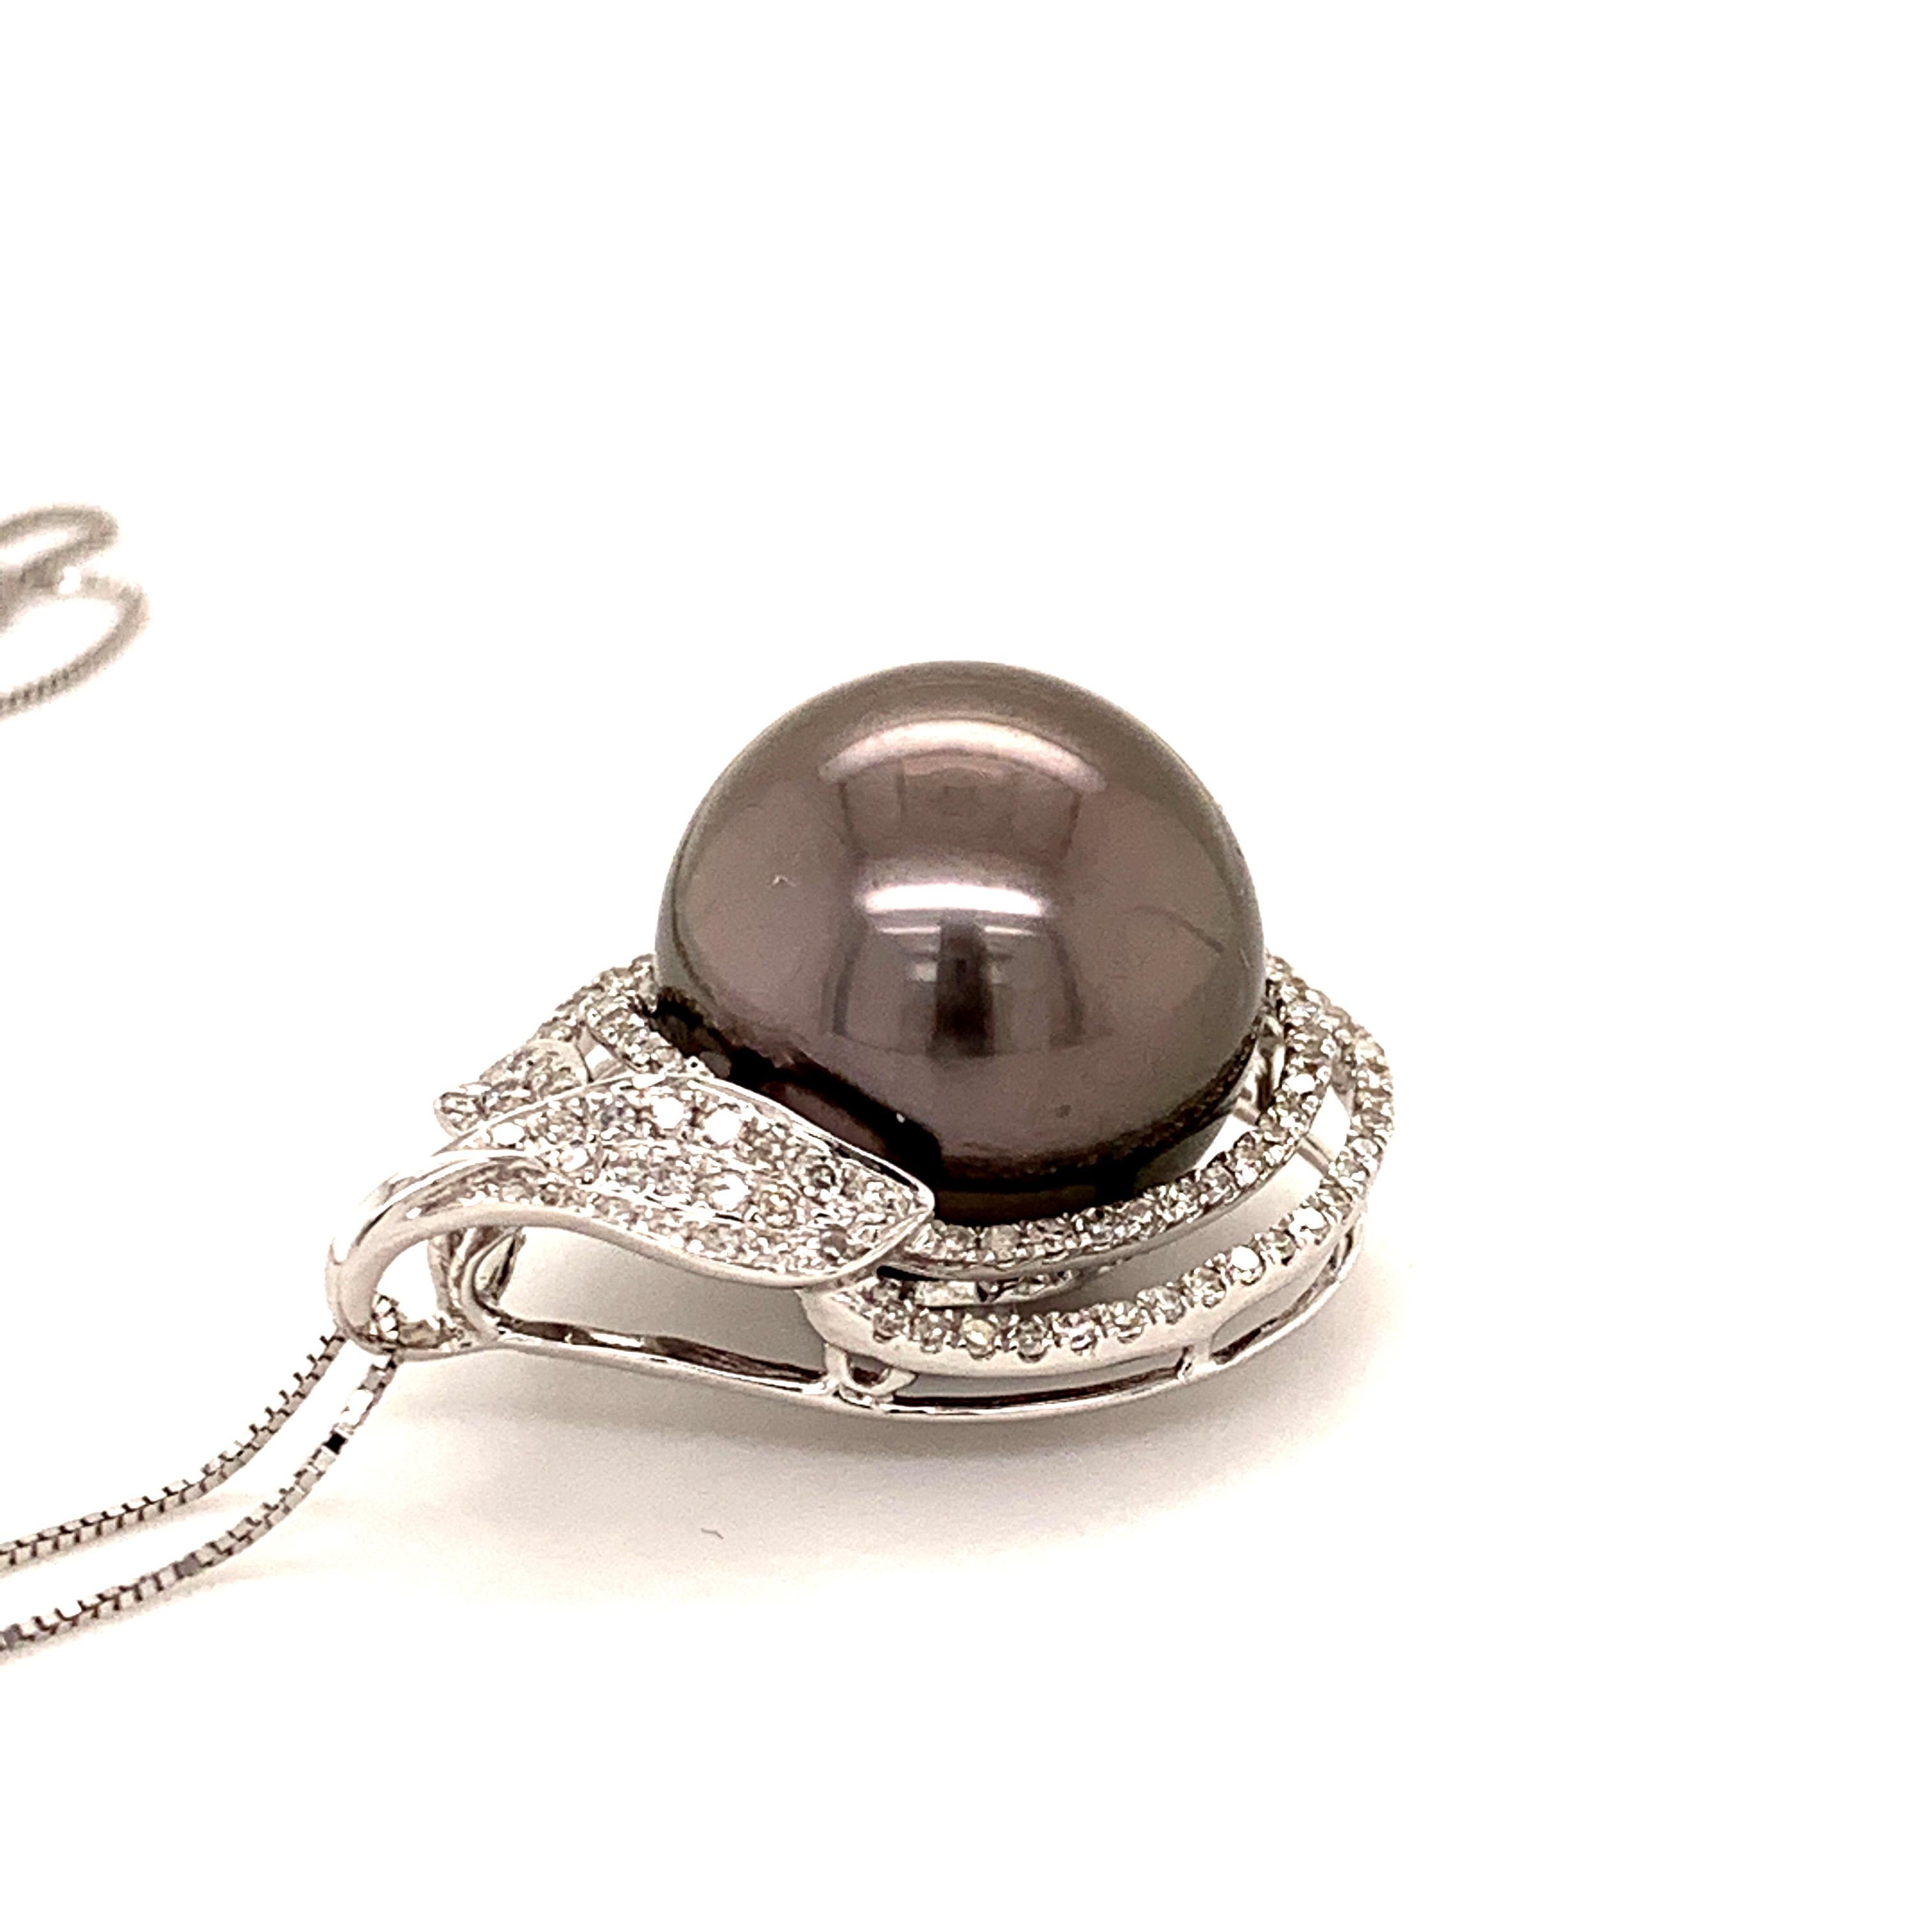 Elegant Tahitian pearl diamond pendant. Very good lustre, black with pink, silver overtone, 14.7mm round Tahitian pearl, surrounded with two rows of round brilliant cut diamonds. Handcrafted design set in high polished 18 karats white gold, along